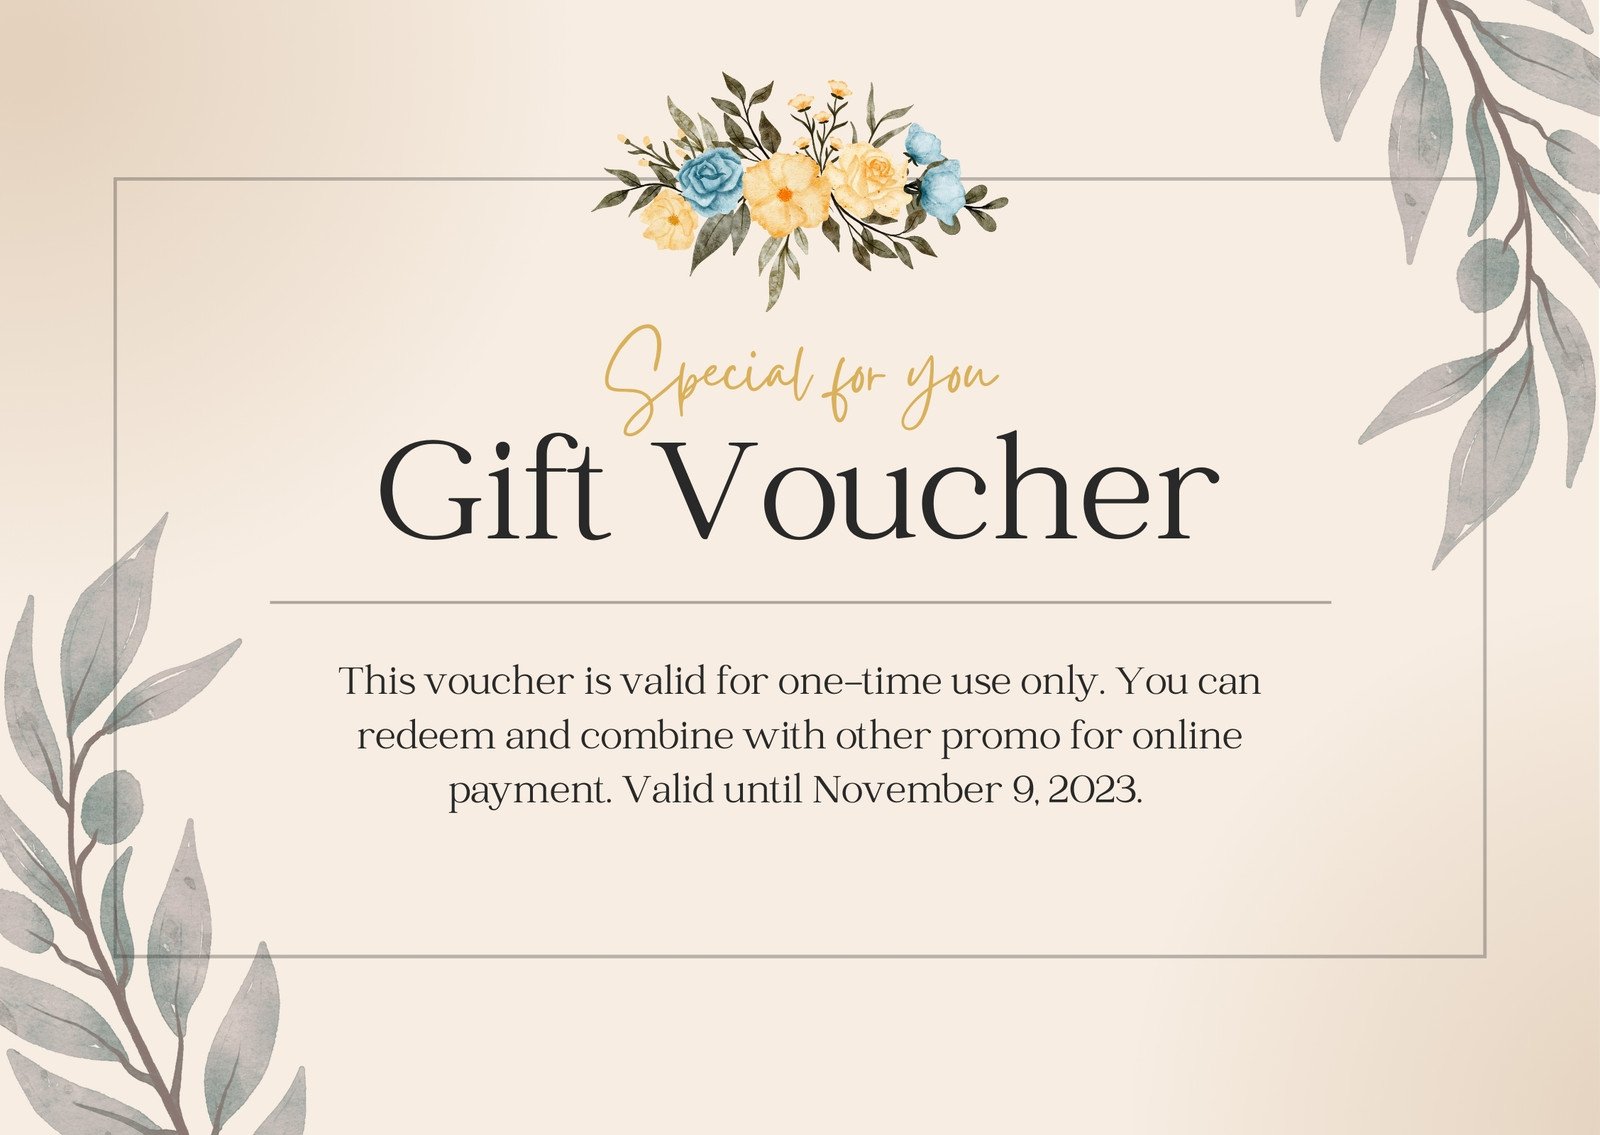 Free Printable Gift Certificate Templates To Customize Canva vlr eng br